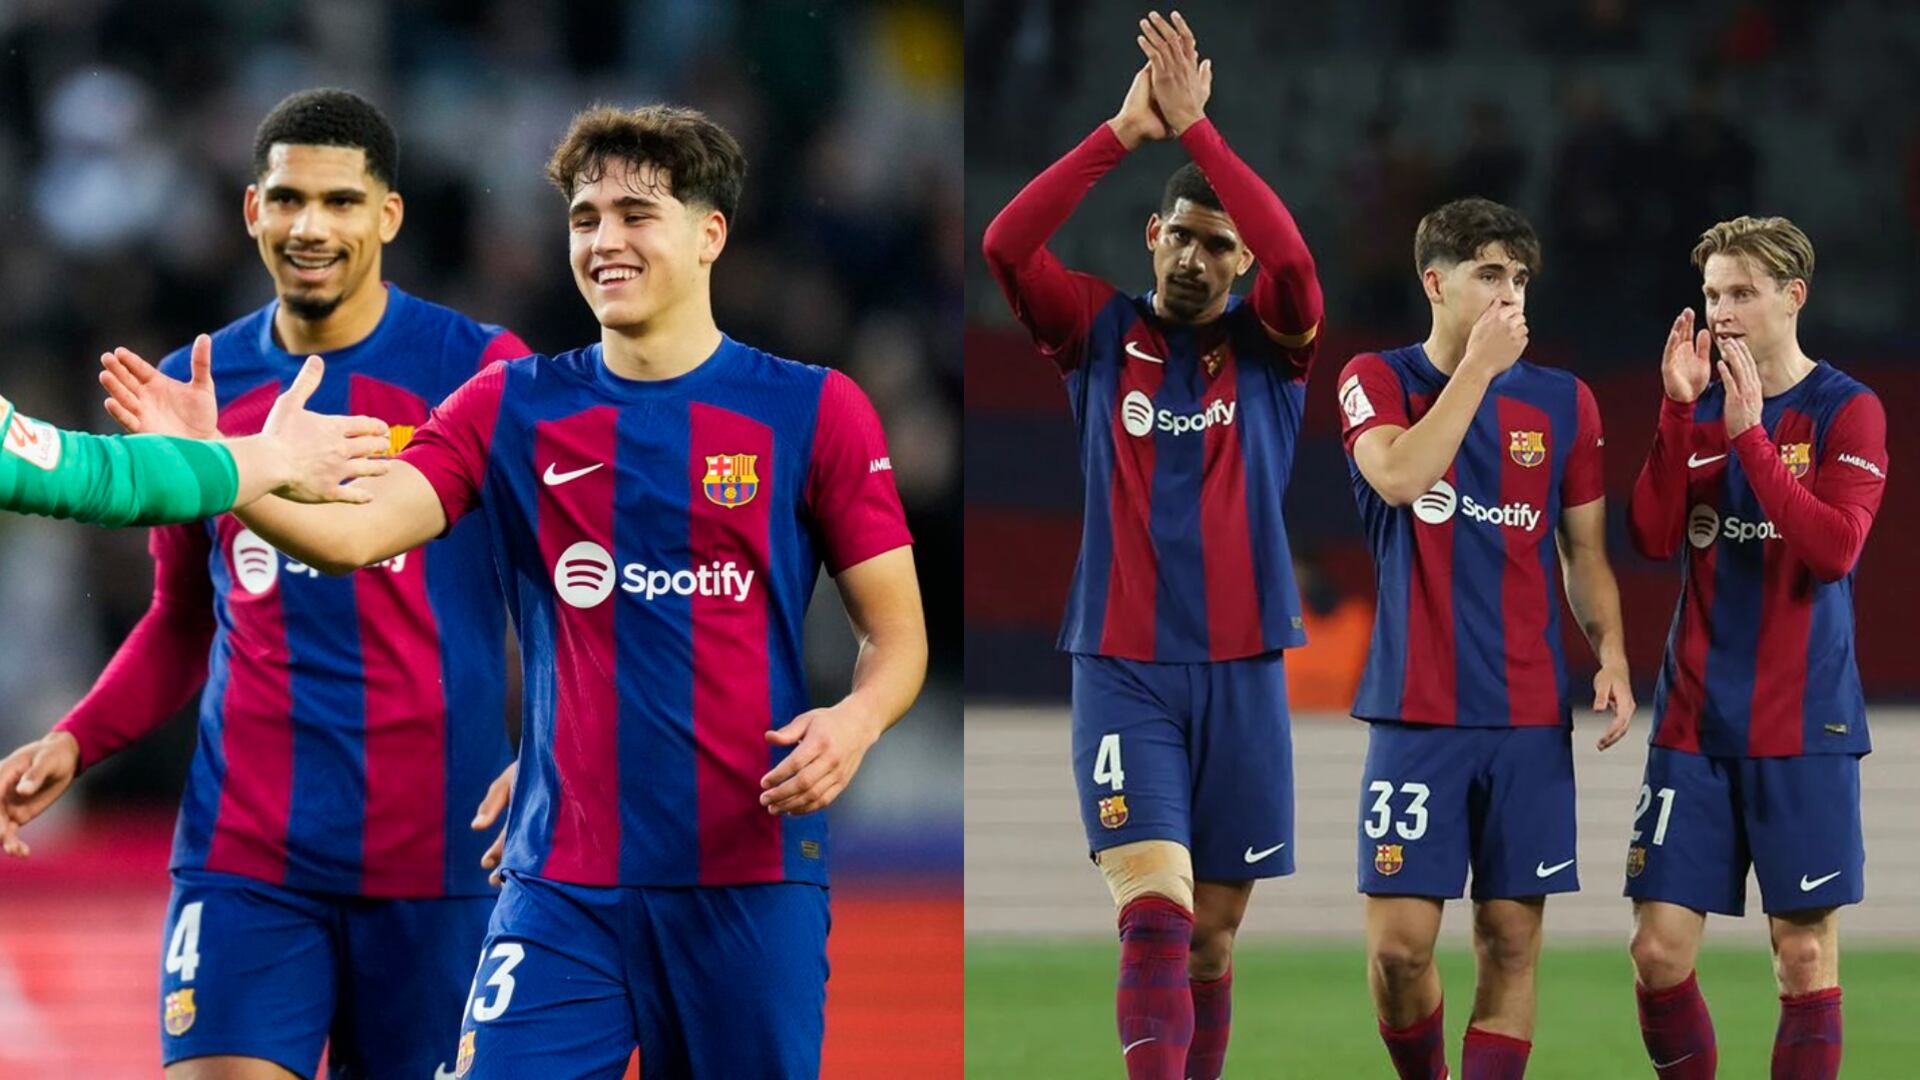 Not Araujo or Cubarsi, the two defenders FC Barcelona are willing to sell